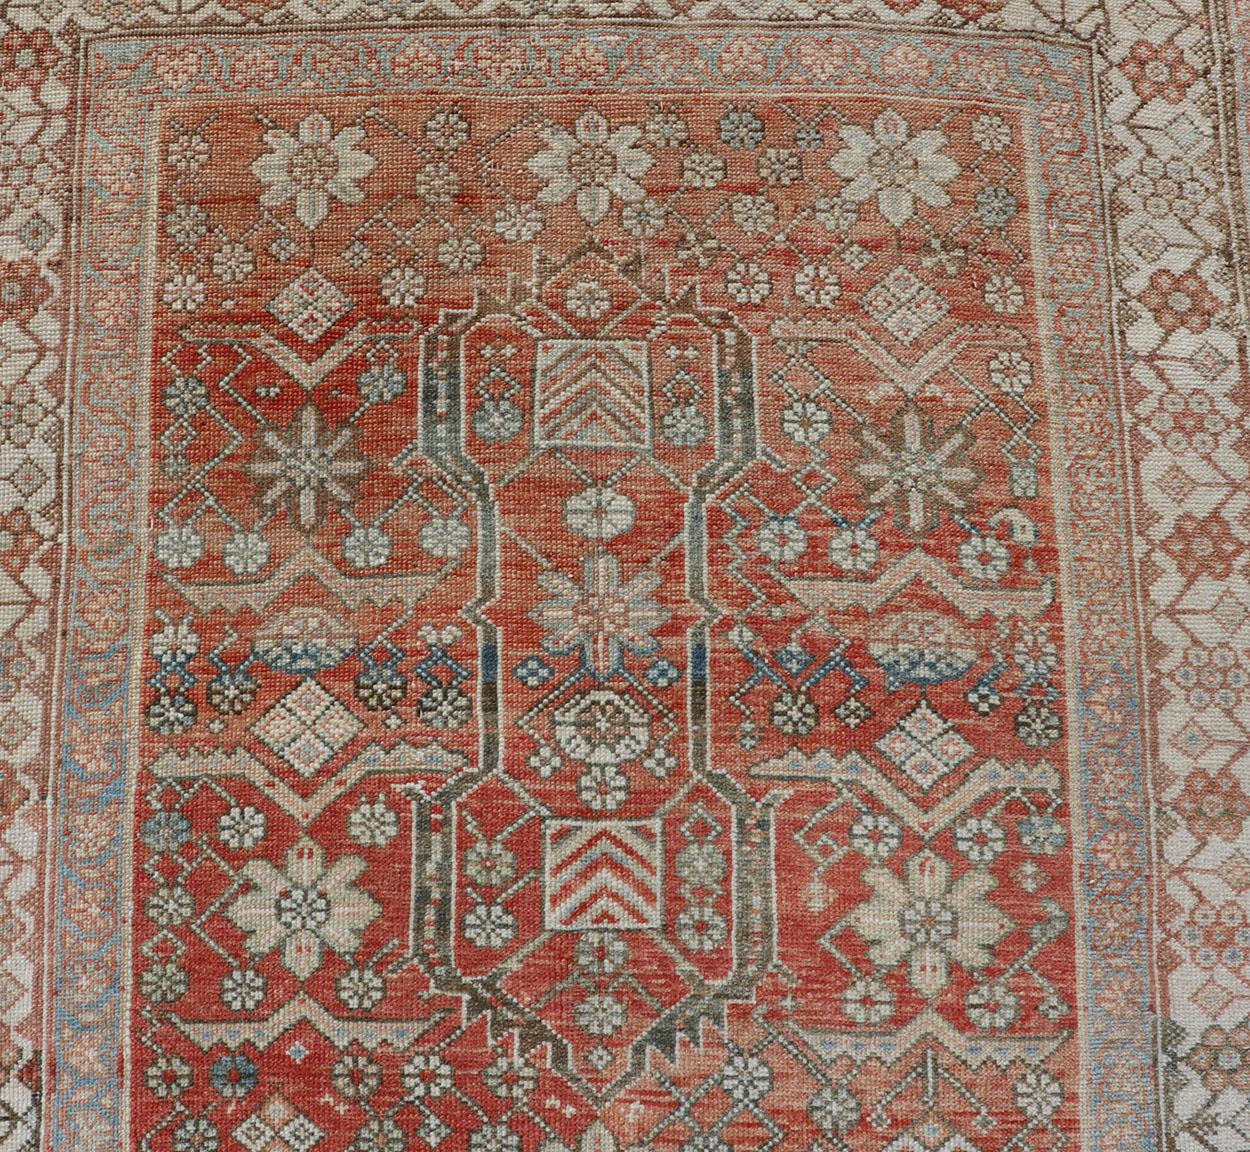 Antique Persian Malayer Runner with soft color tones and all-over geometric design
Malayer antique Runner from Persia with geometric design, Keivan Woven Arts / rug EMB-8533-P178693, country of origin / type: Iran / Malayer, circa 1920.

This